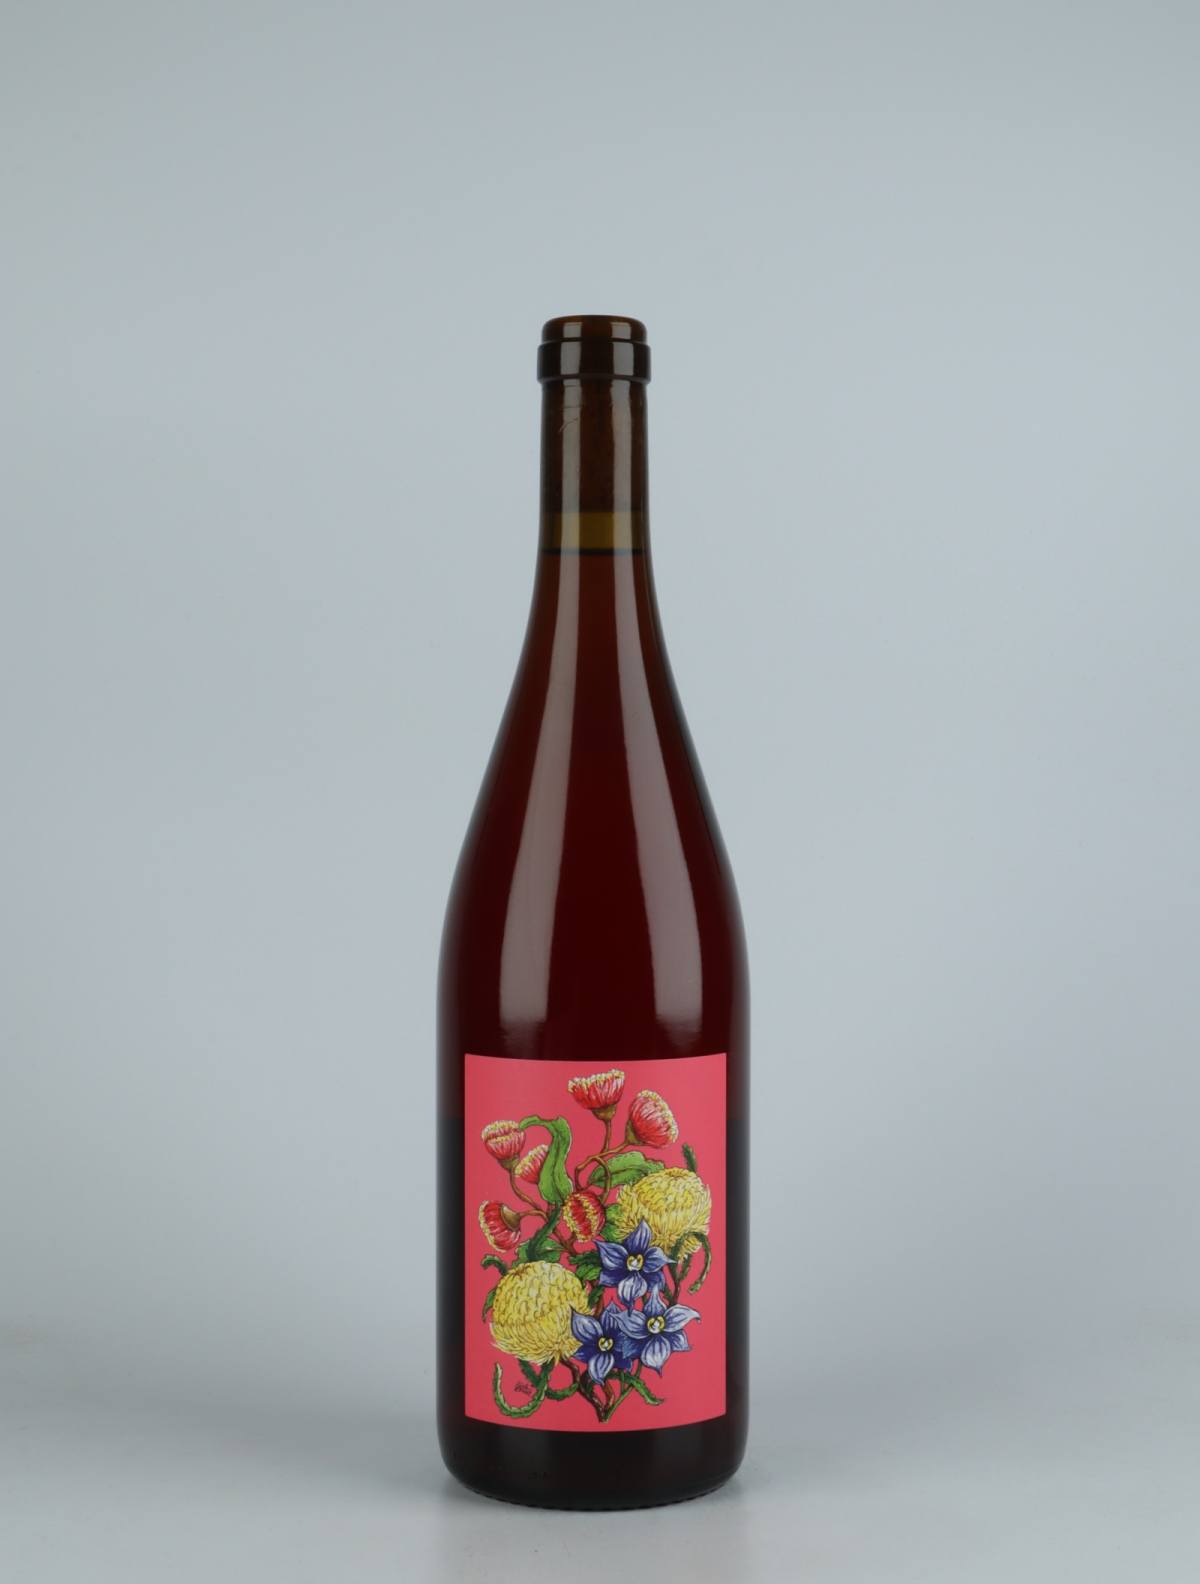 A bottle 2021 Pinot Noir, Pinot Gris, Chardonnay Rosé from Borachio, Adelaide Hills in 